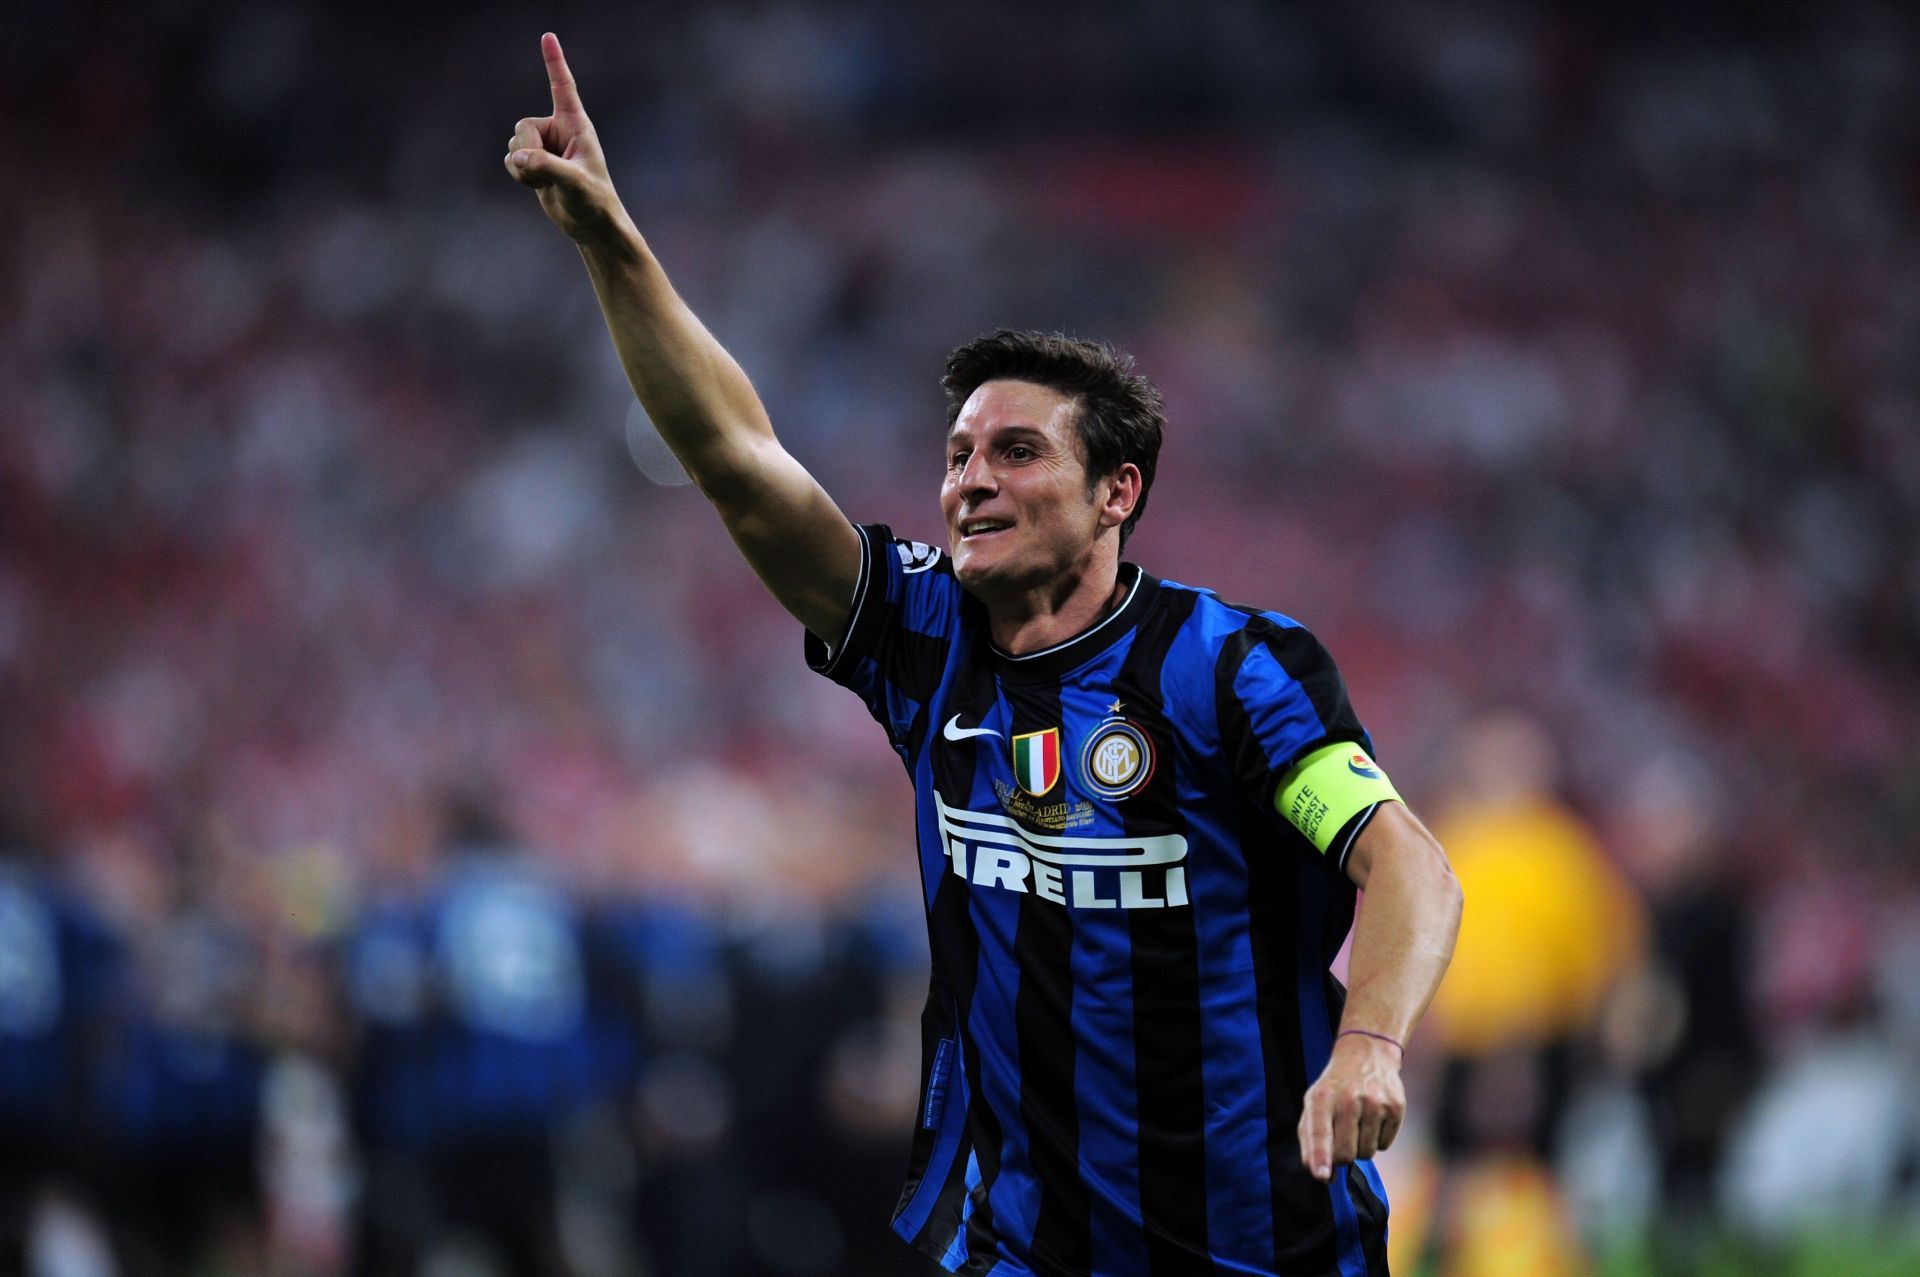 Javier Zanetti won the Champions League with Inter Milan in 2010.